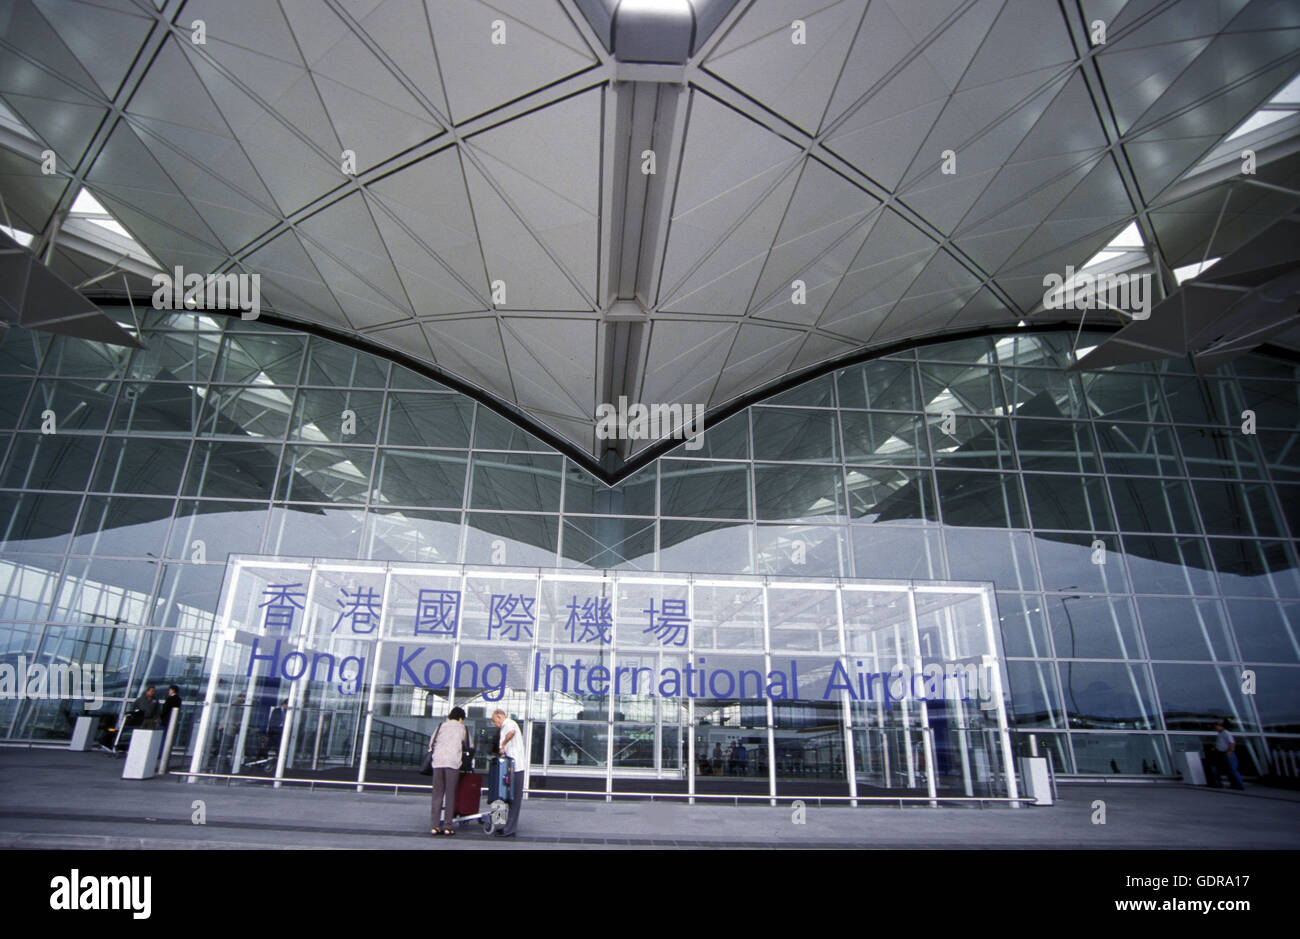 the new international airport of Hong Kong in the south of China in Asia. Stock Photo